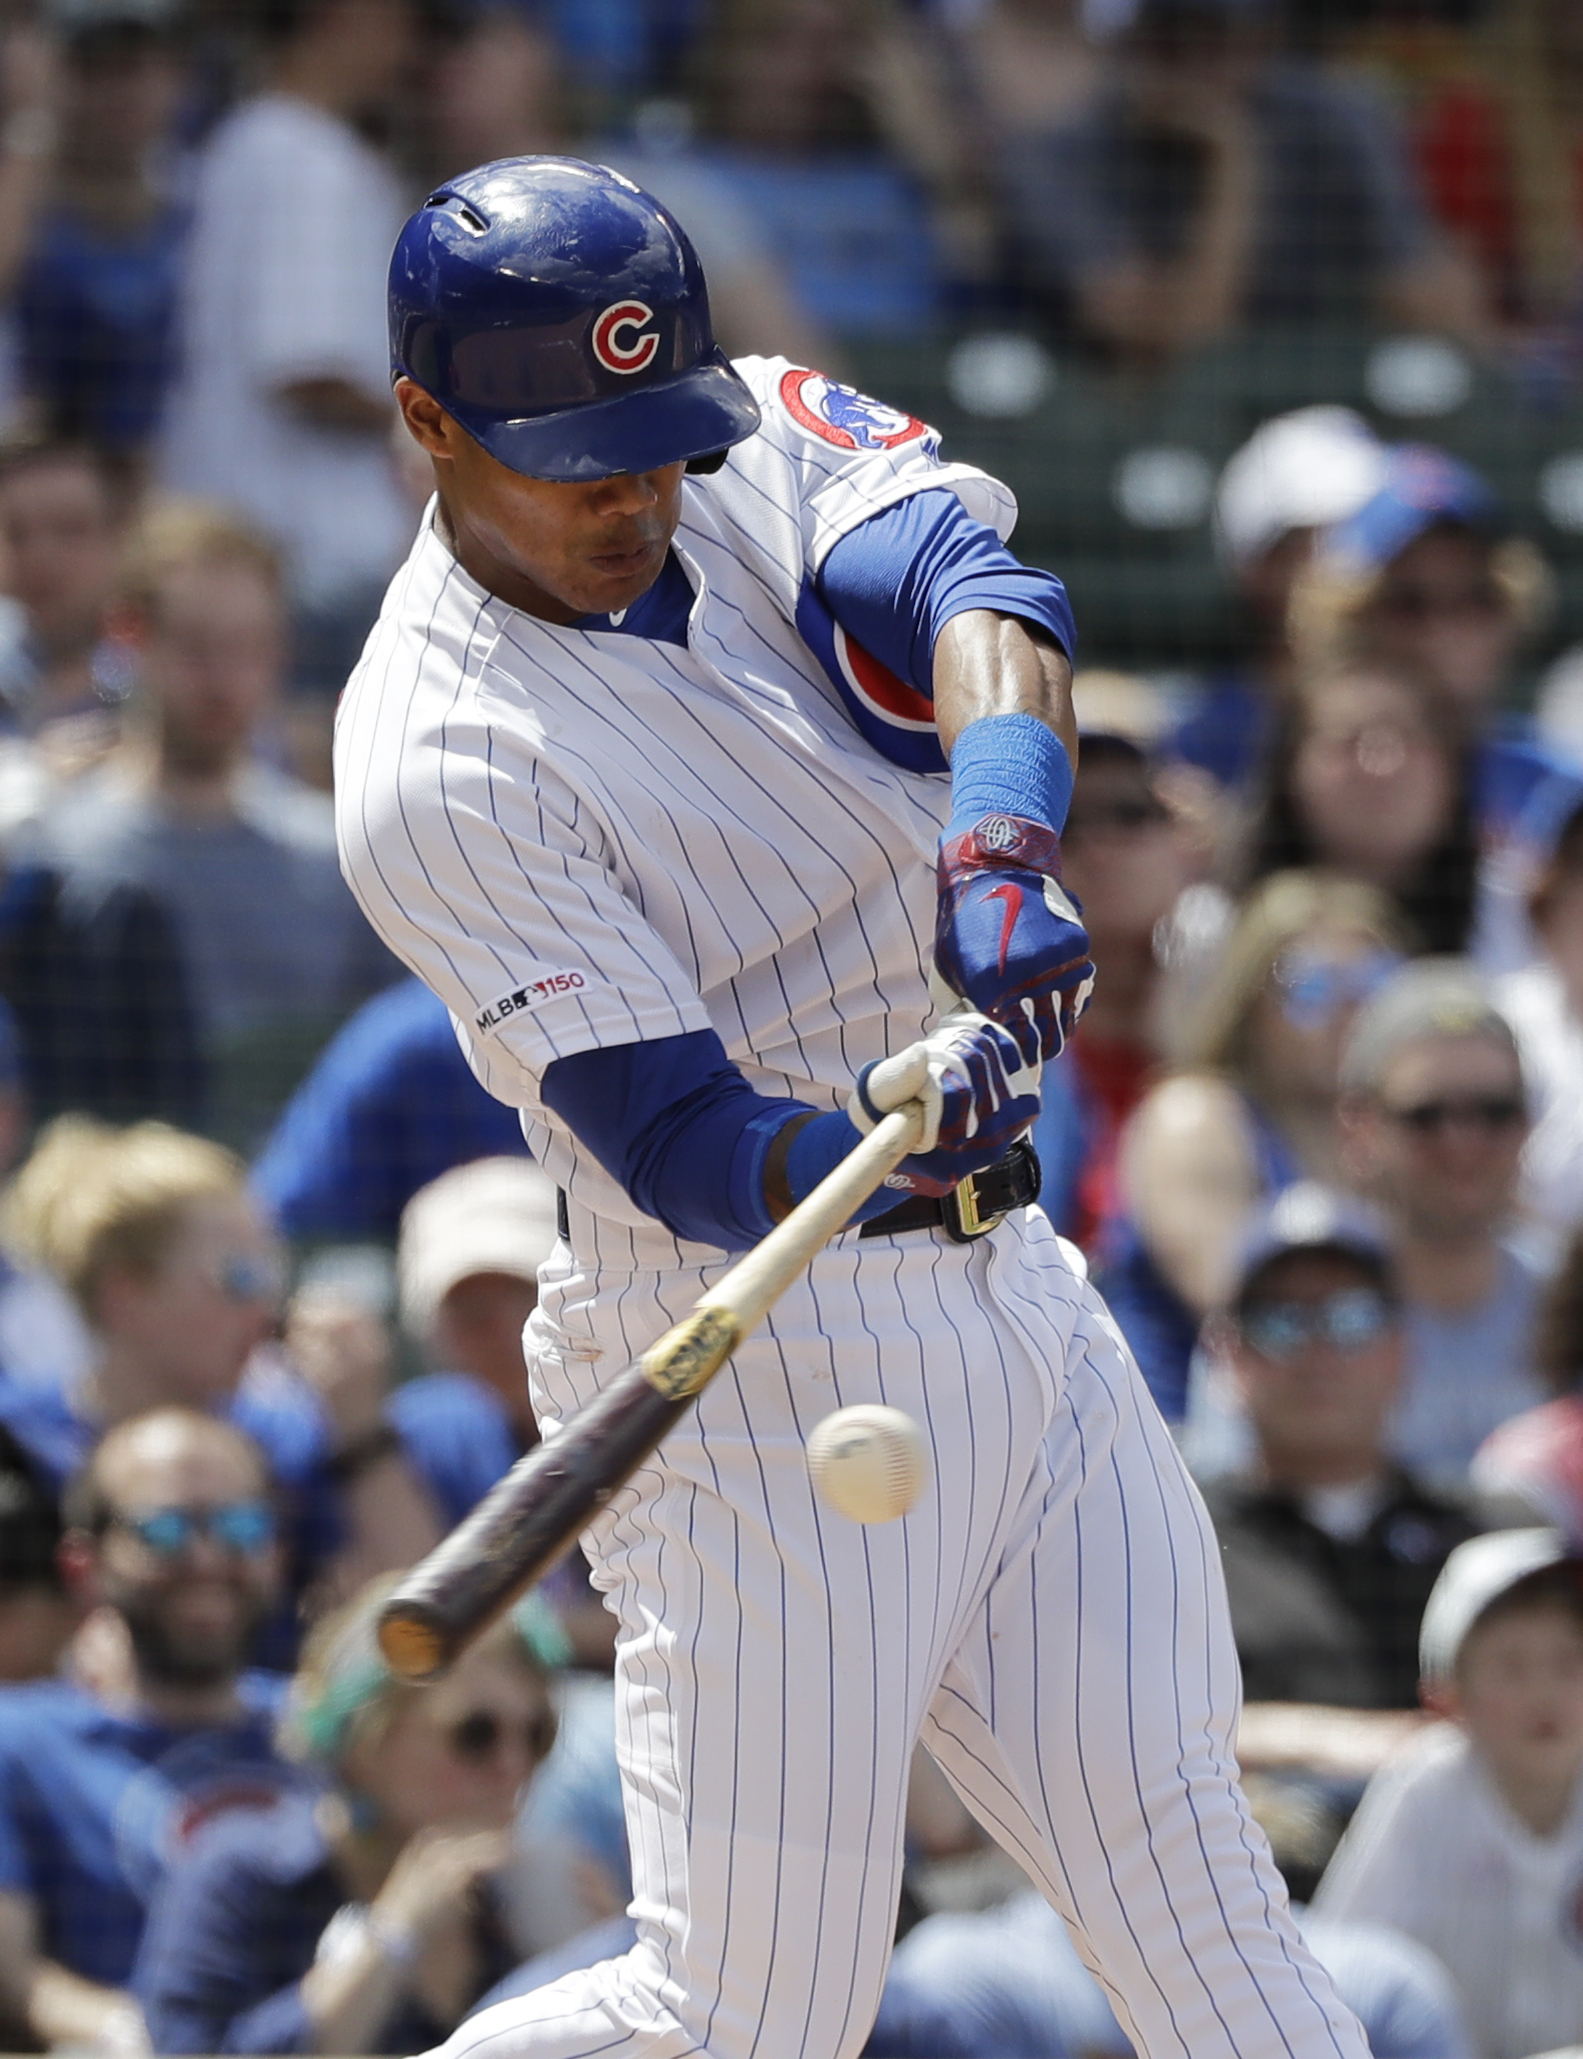 Cubs top Reds 8-6 in wild 6-HR game